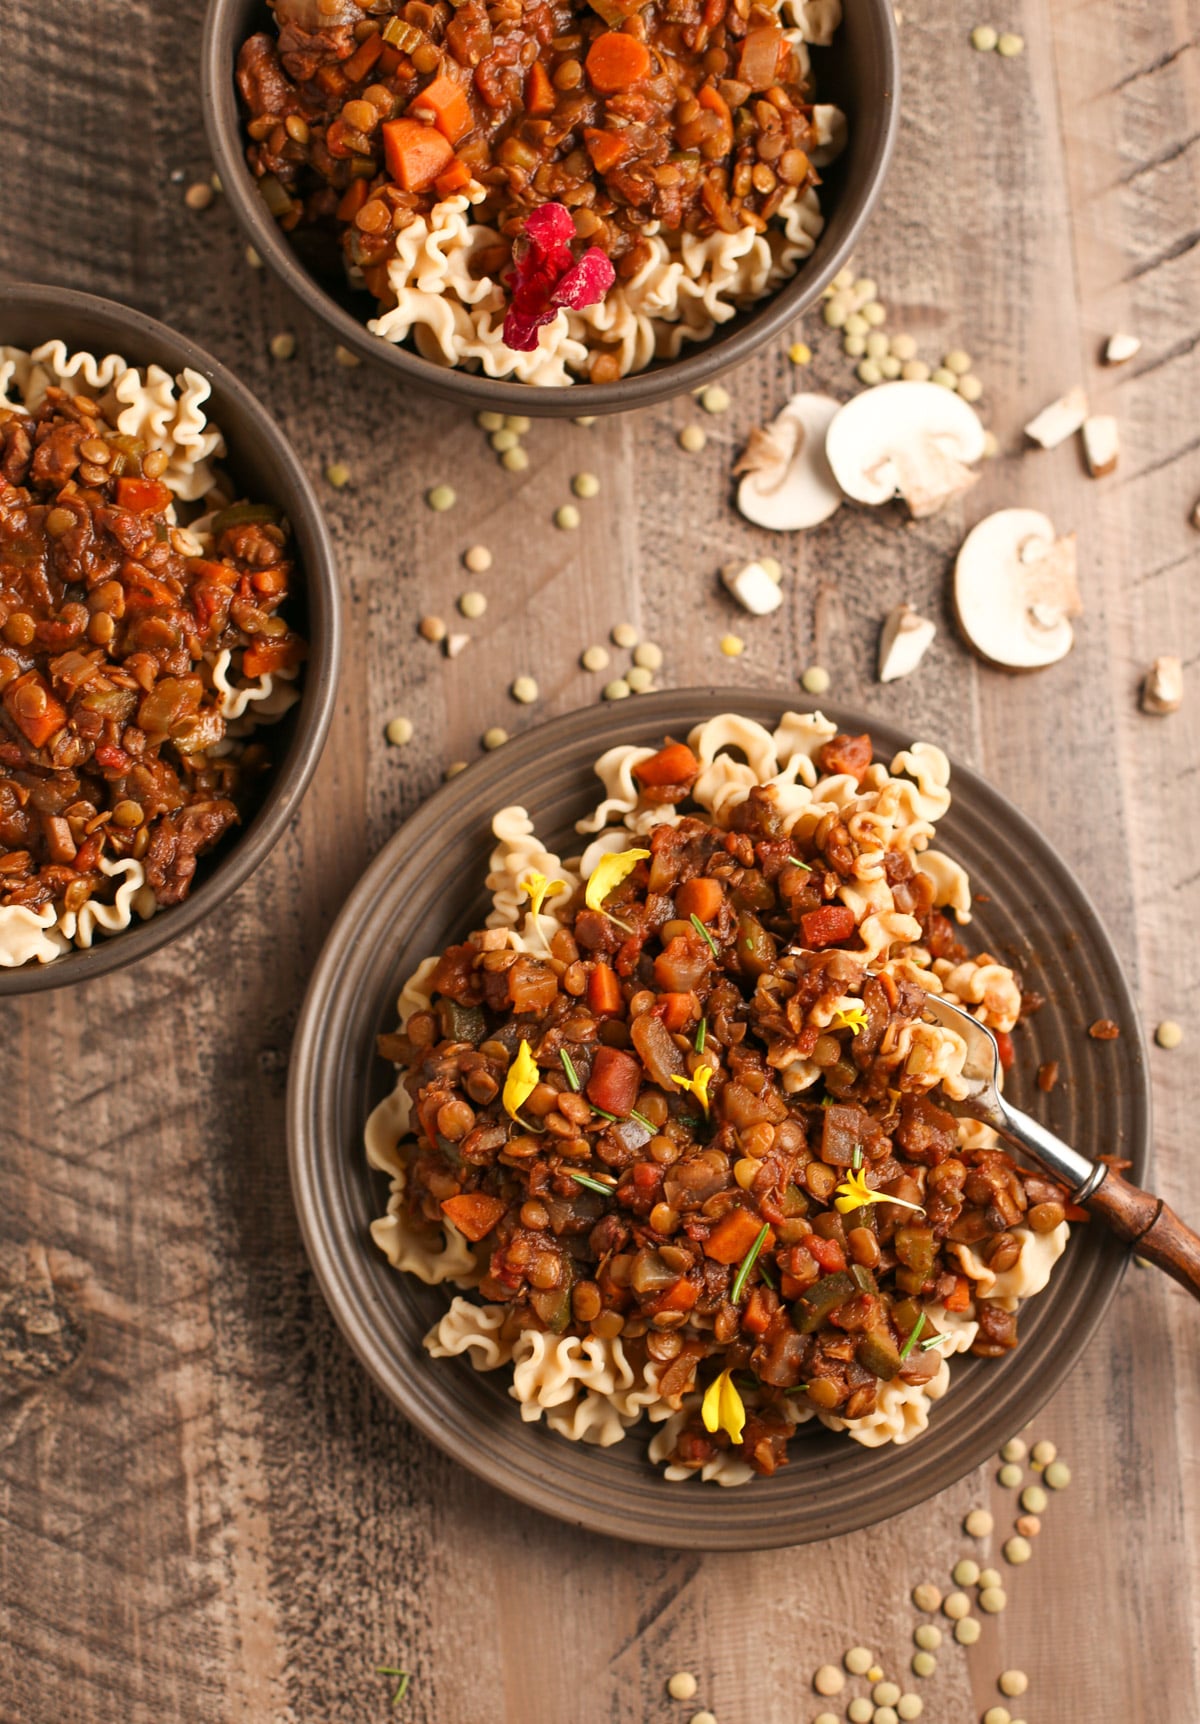 Three bowls of lentil bolognese with mushrooms and lentils in background